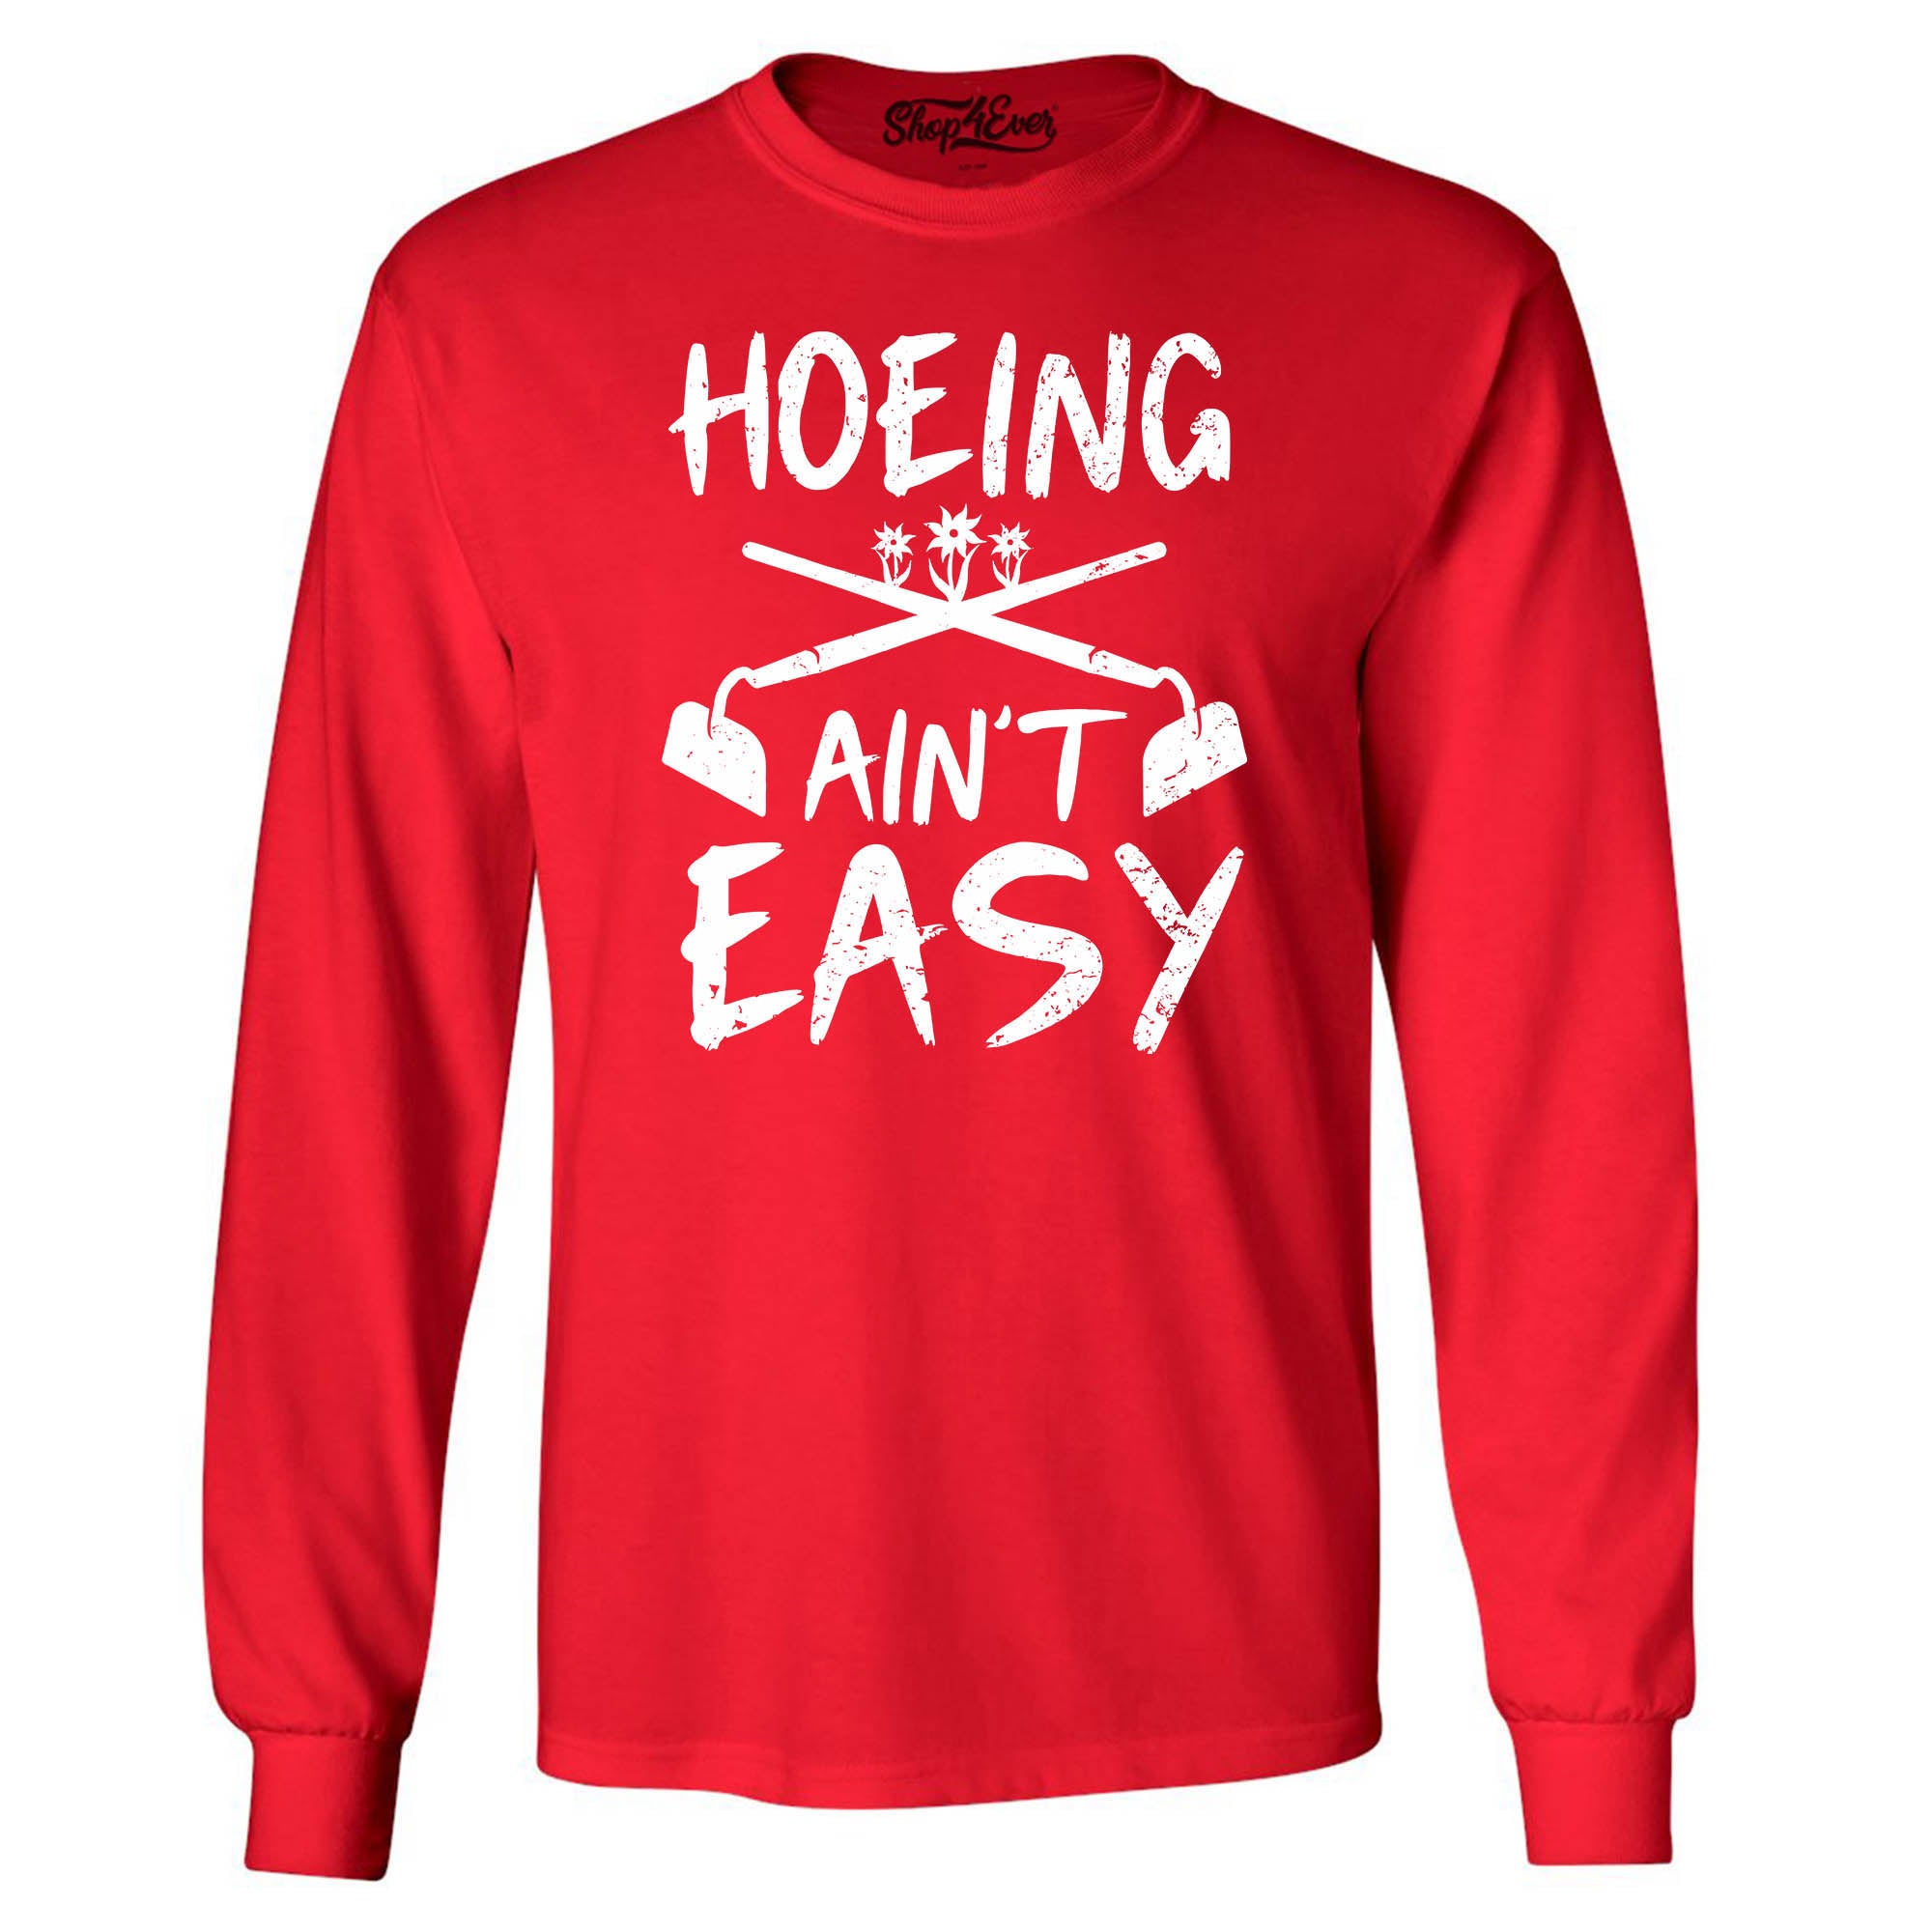 Hoeing Ain't Easy Funny Long Sleeve Shirt